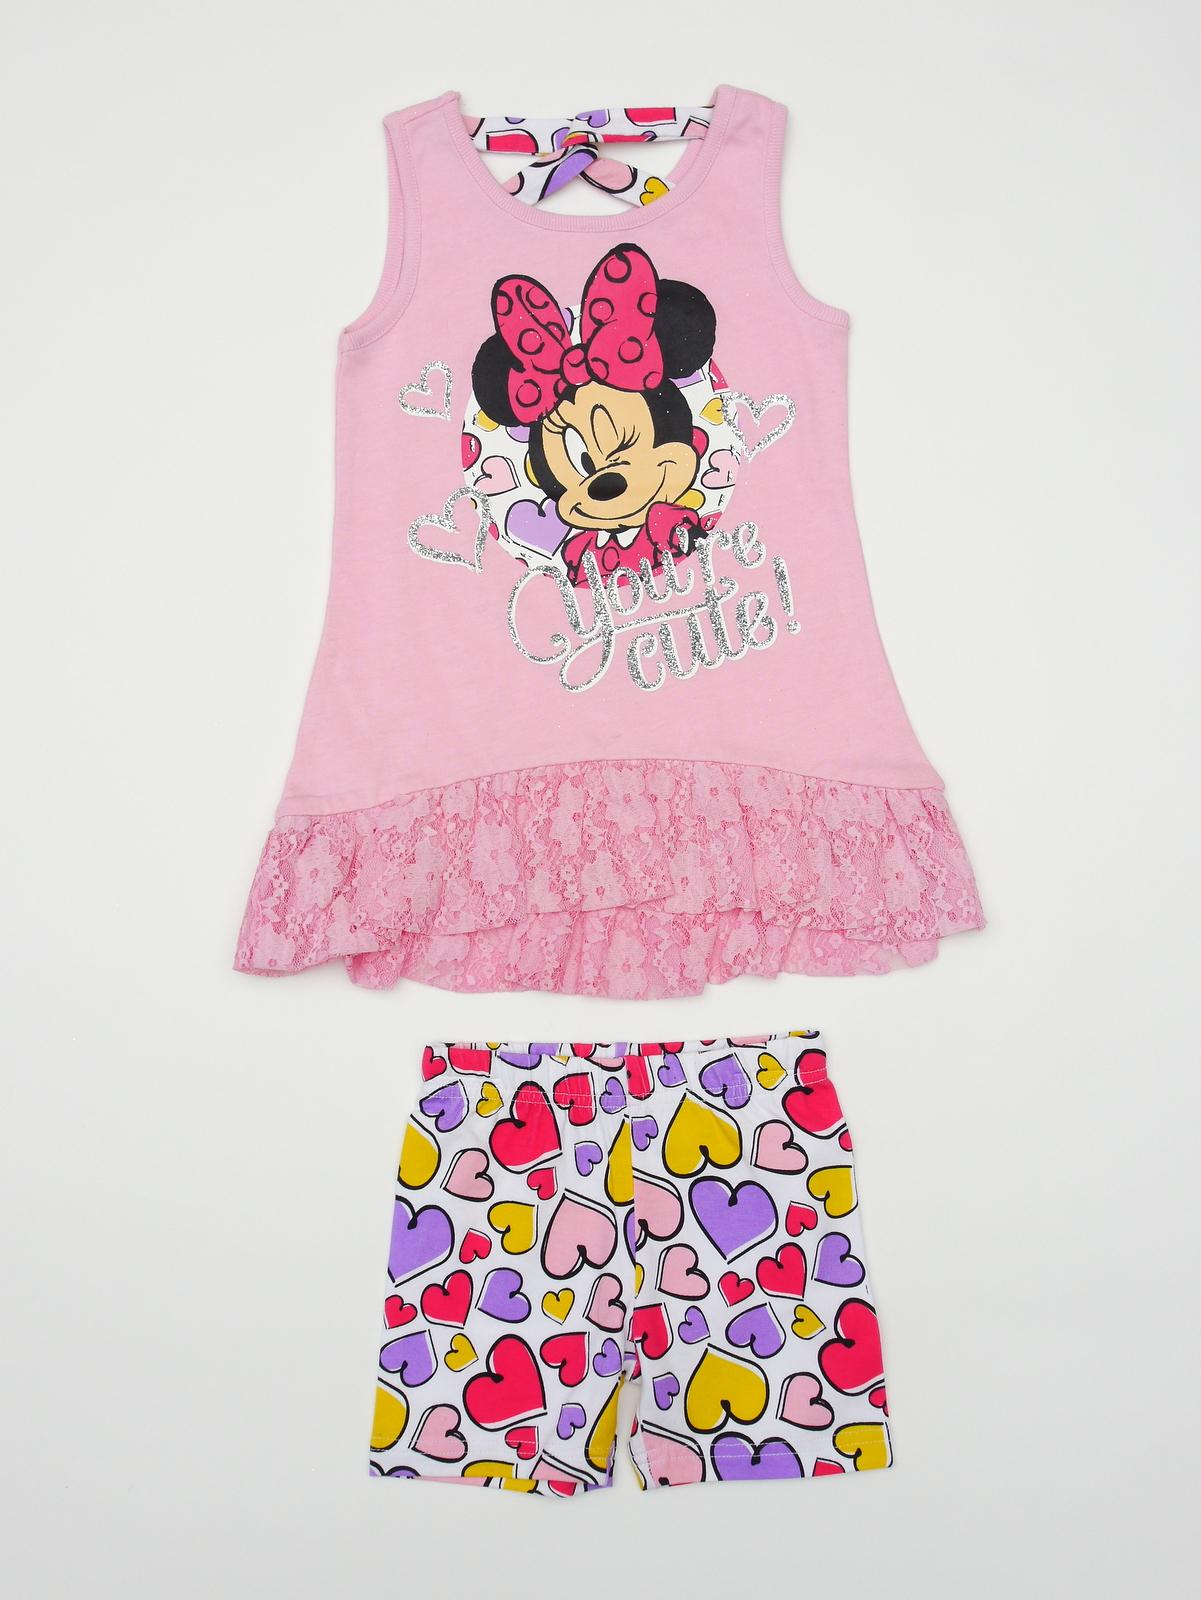 Disney Minnie Mouse Infant & Toddler Girl's Tank Top & Shorts - Hearts